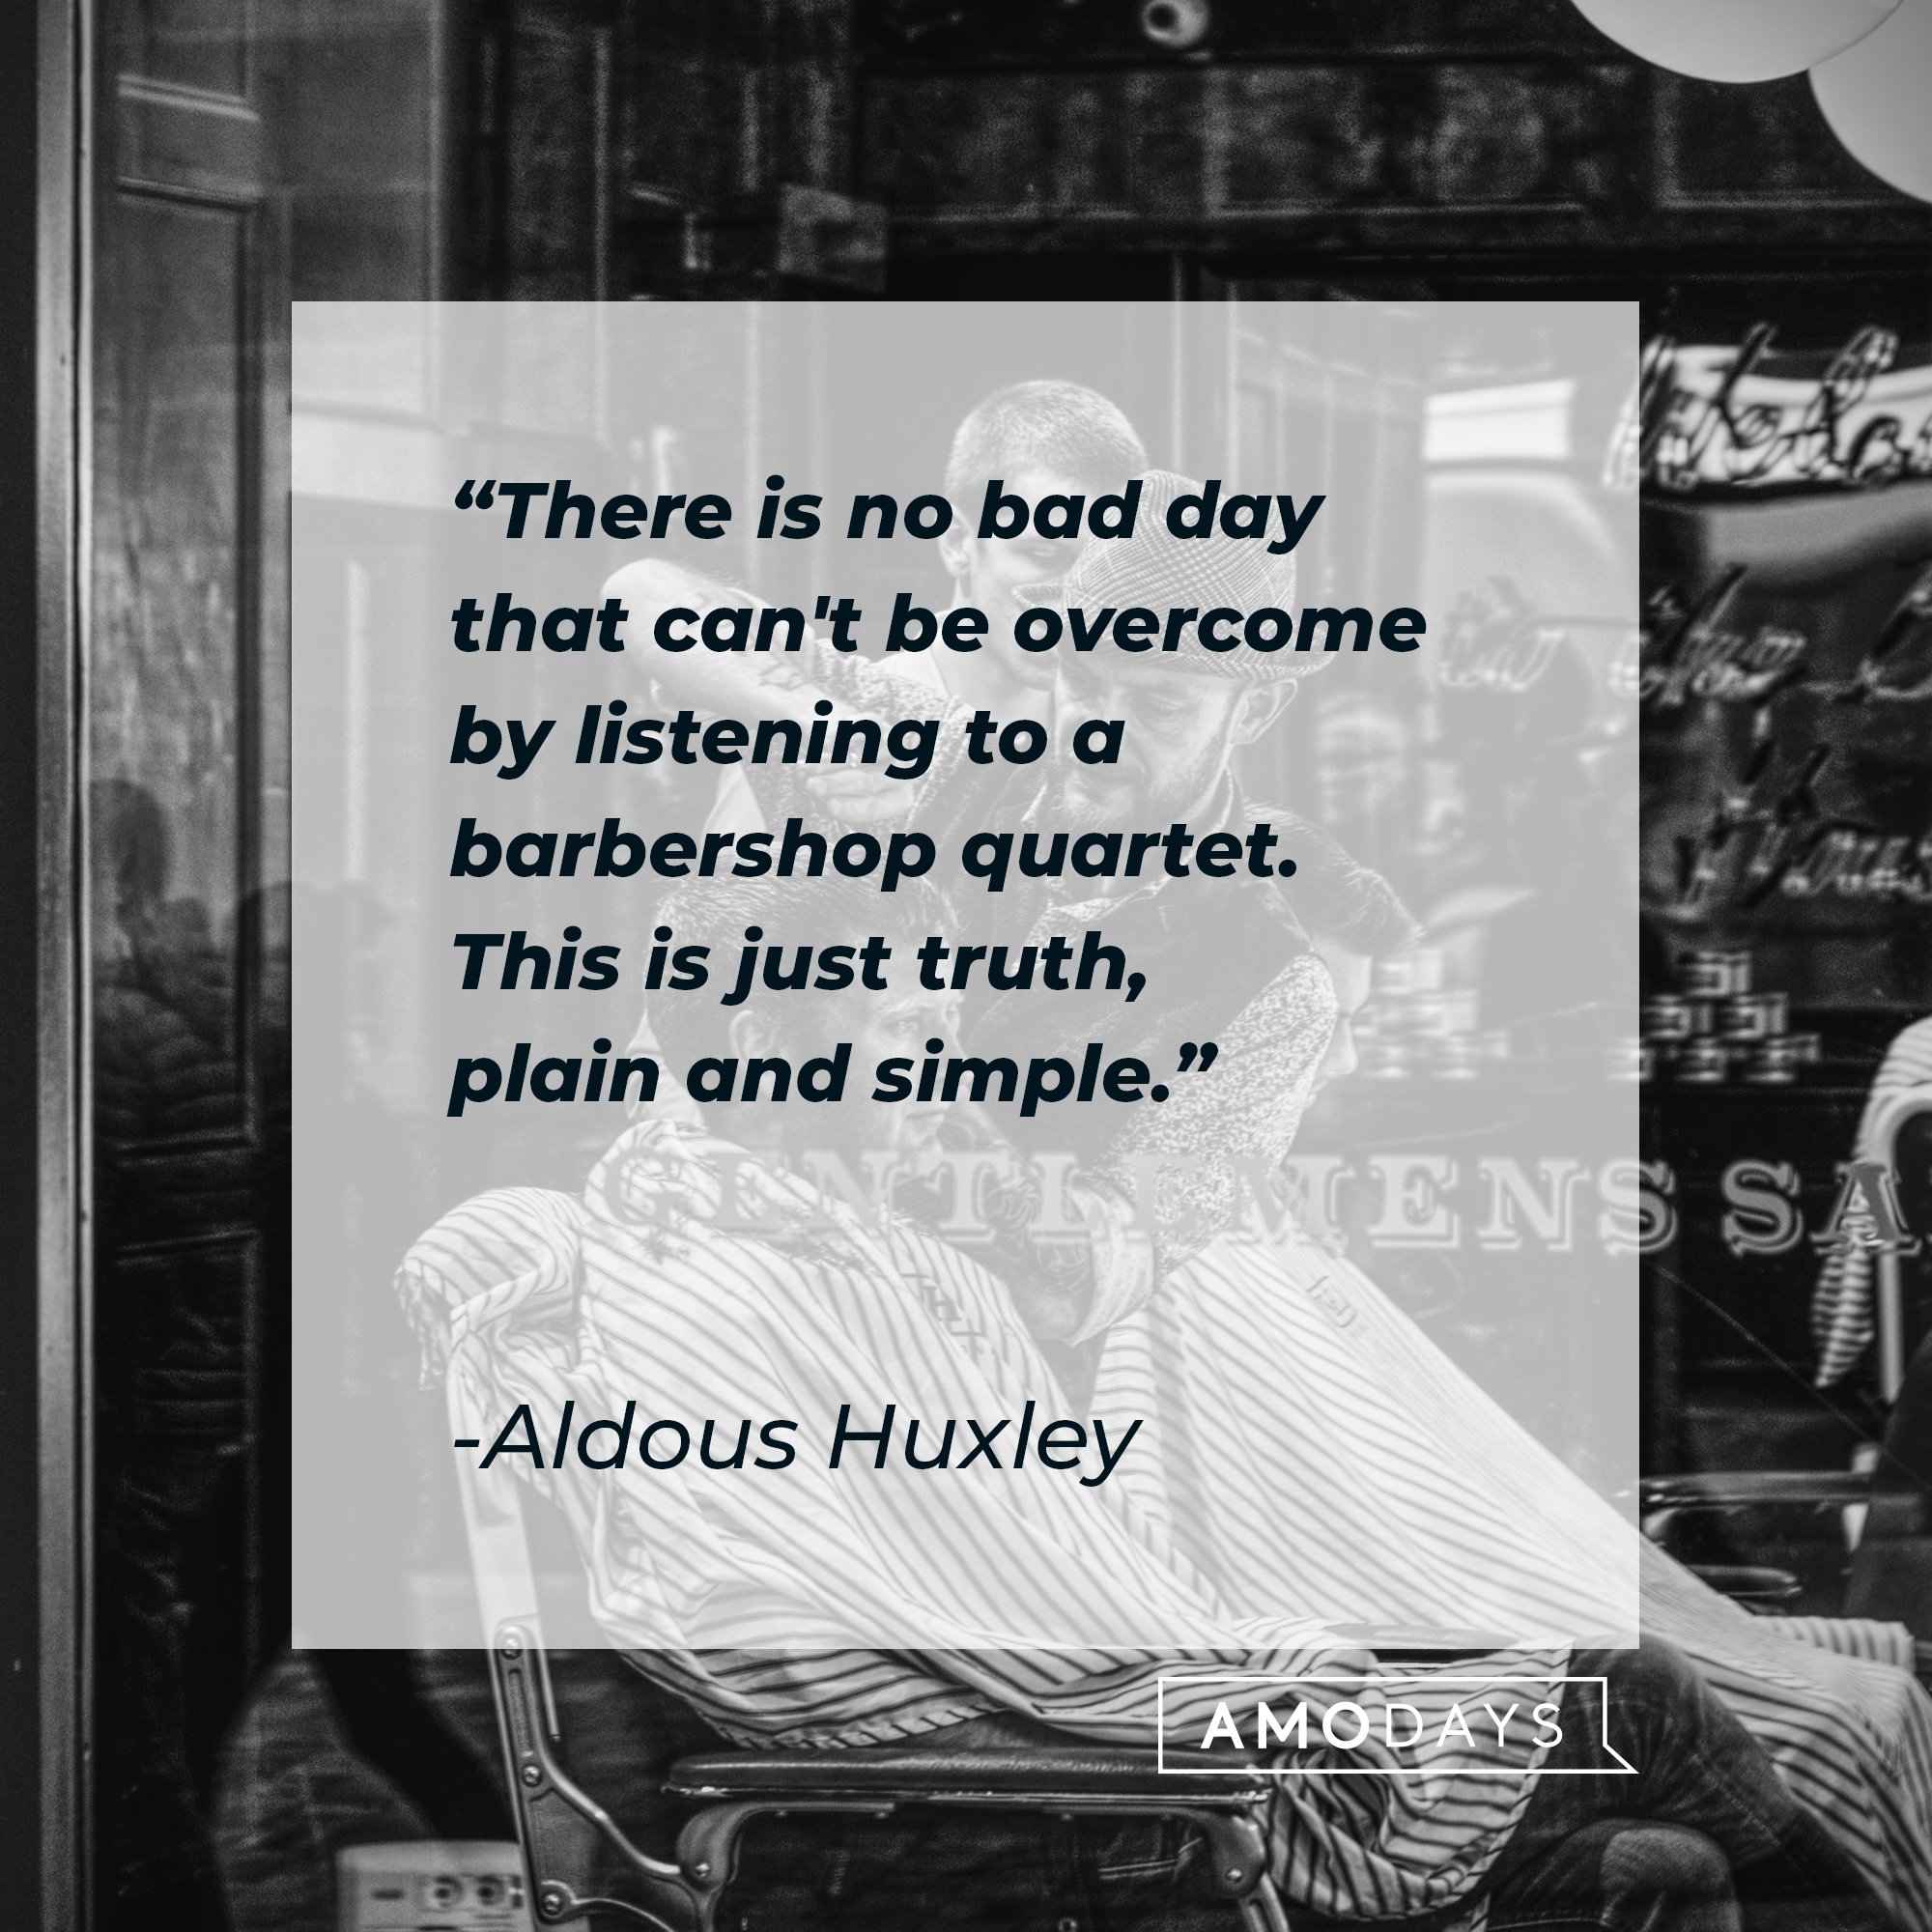 Aldous Huxley's quote: "There is no bad day that can't be overcome by listening to a barbershop quartet. This is just truth, plain and simple." | Image: AmoDays